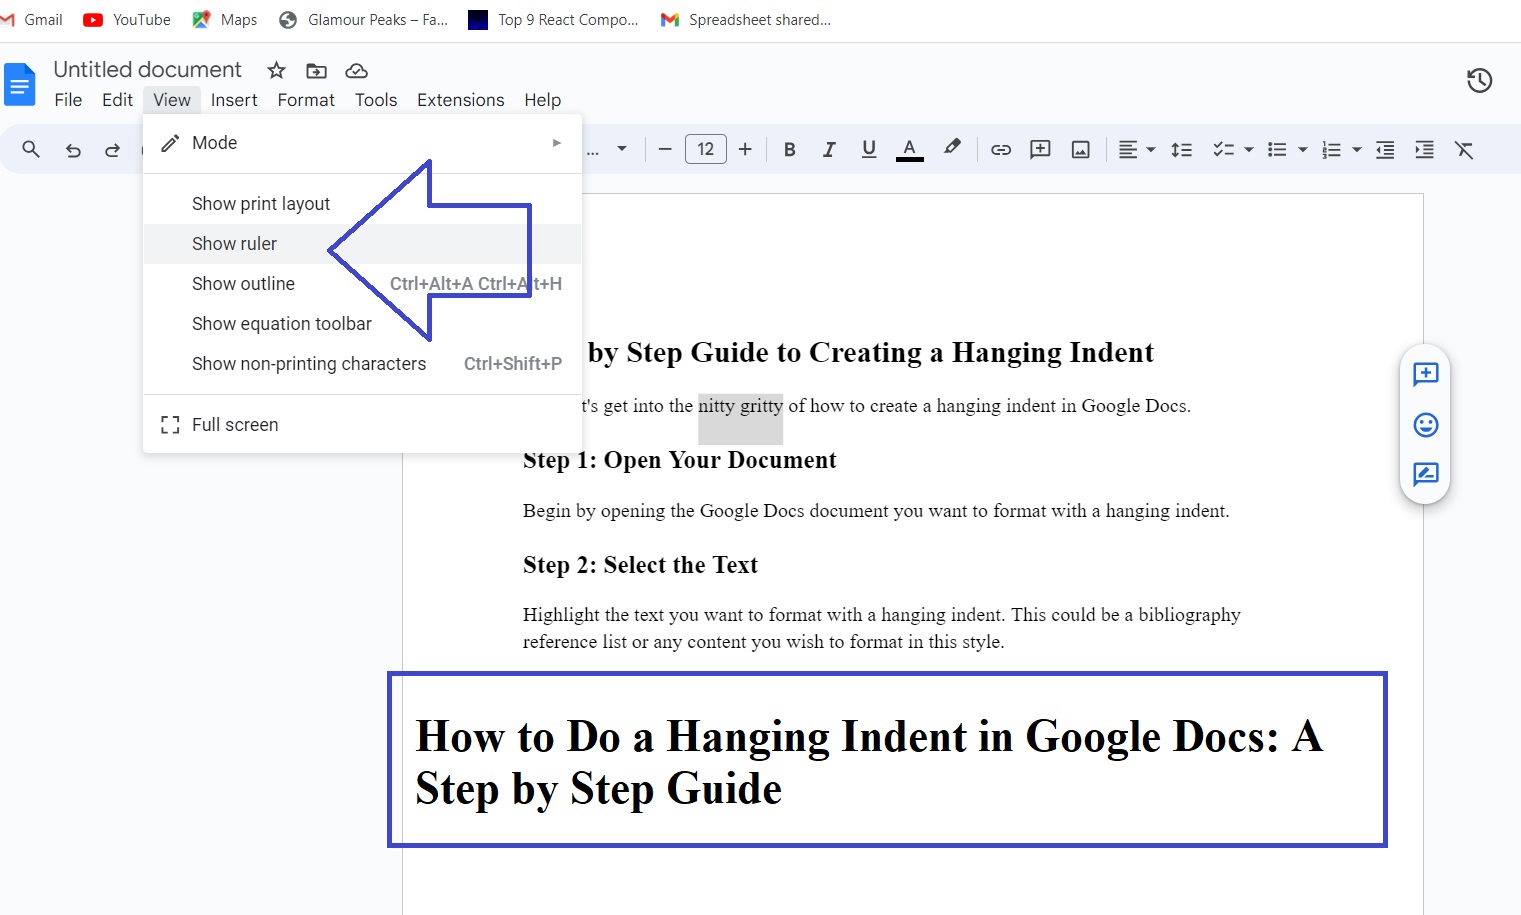 How to Do a Hanging Indent in Google Docs